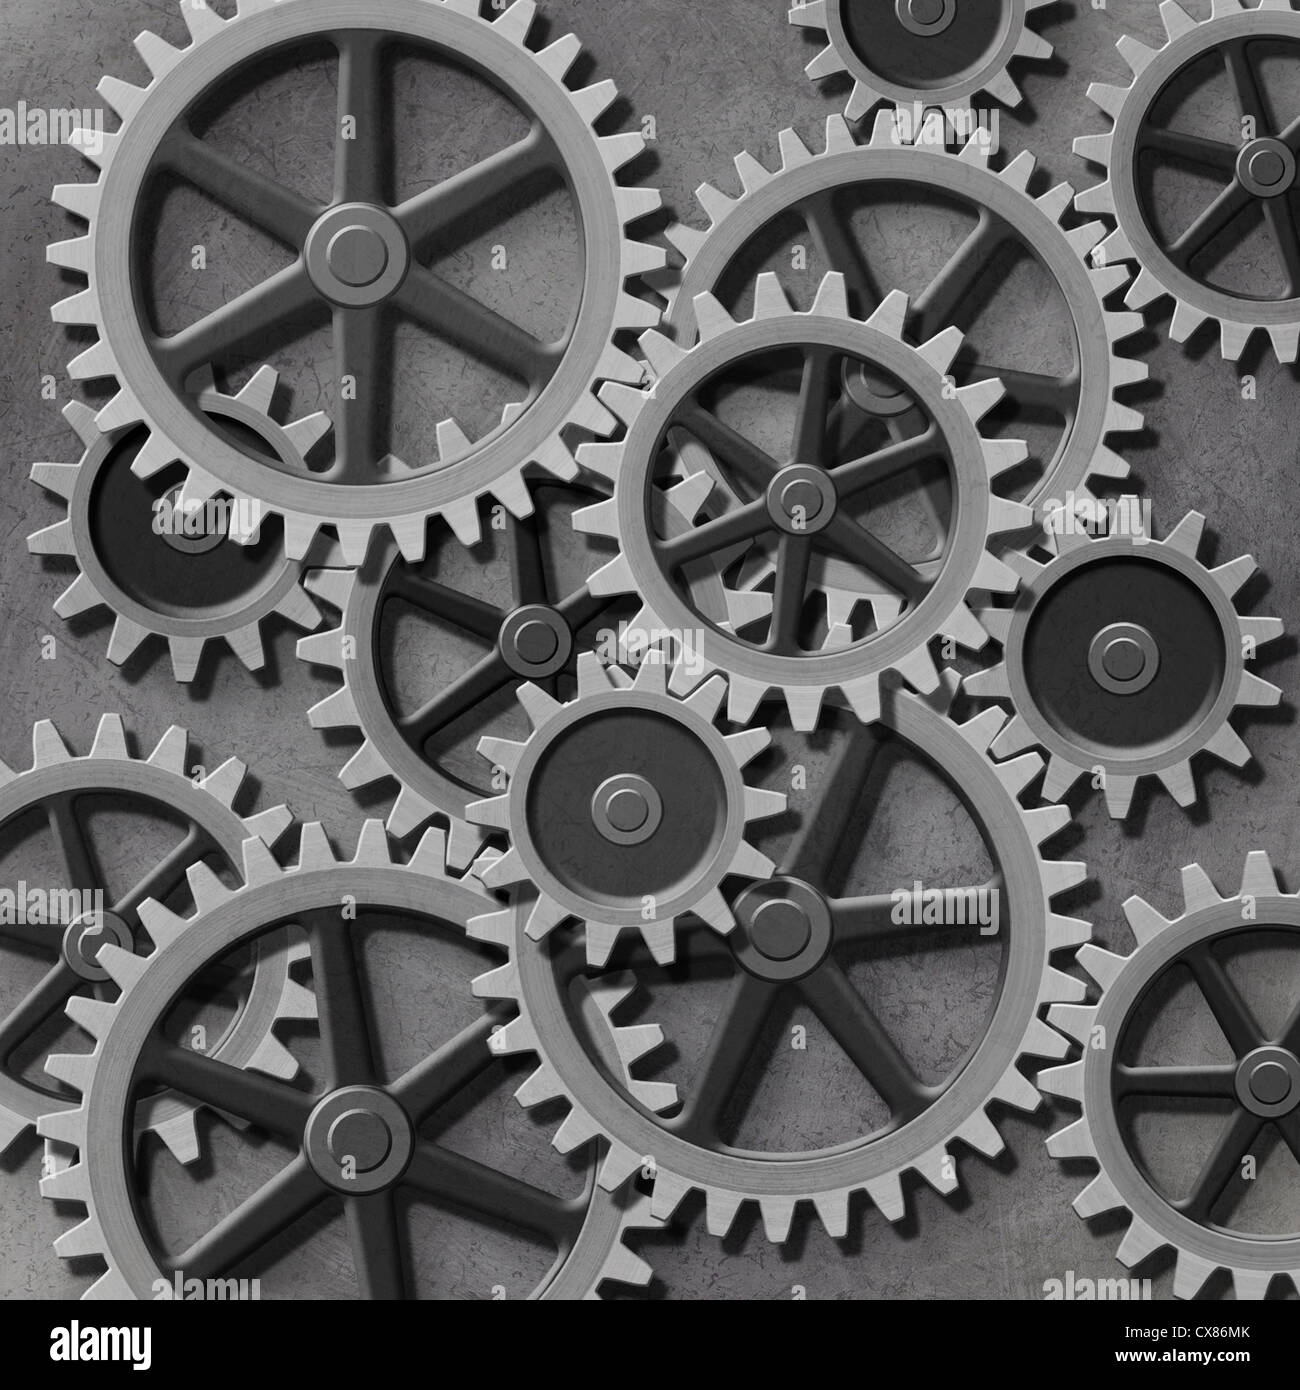 A Mechanical Background with Gears and Cogs Stock Photo - Alamy